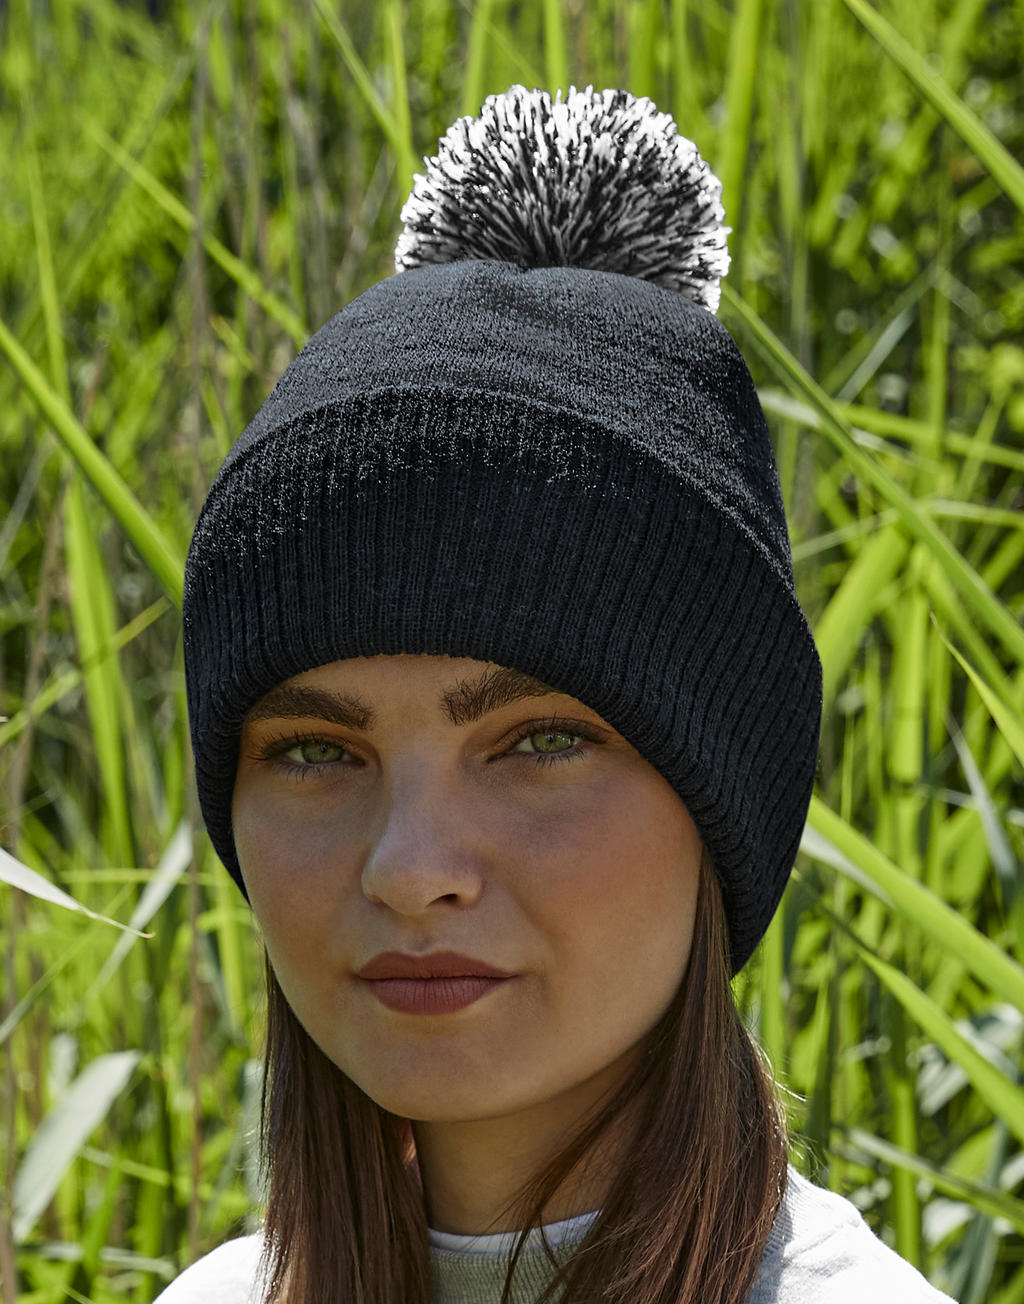  Recycled Snowstar? Beanie in Farbe Black/White